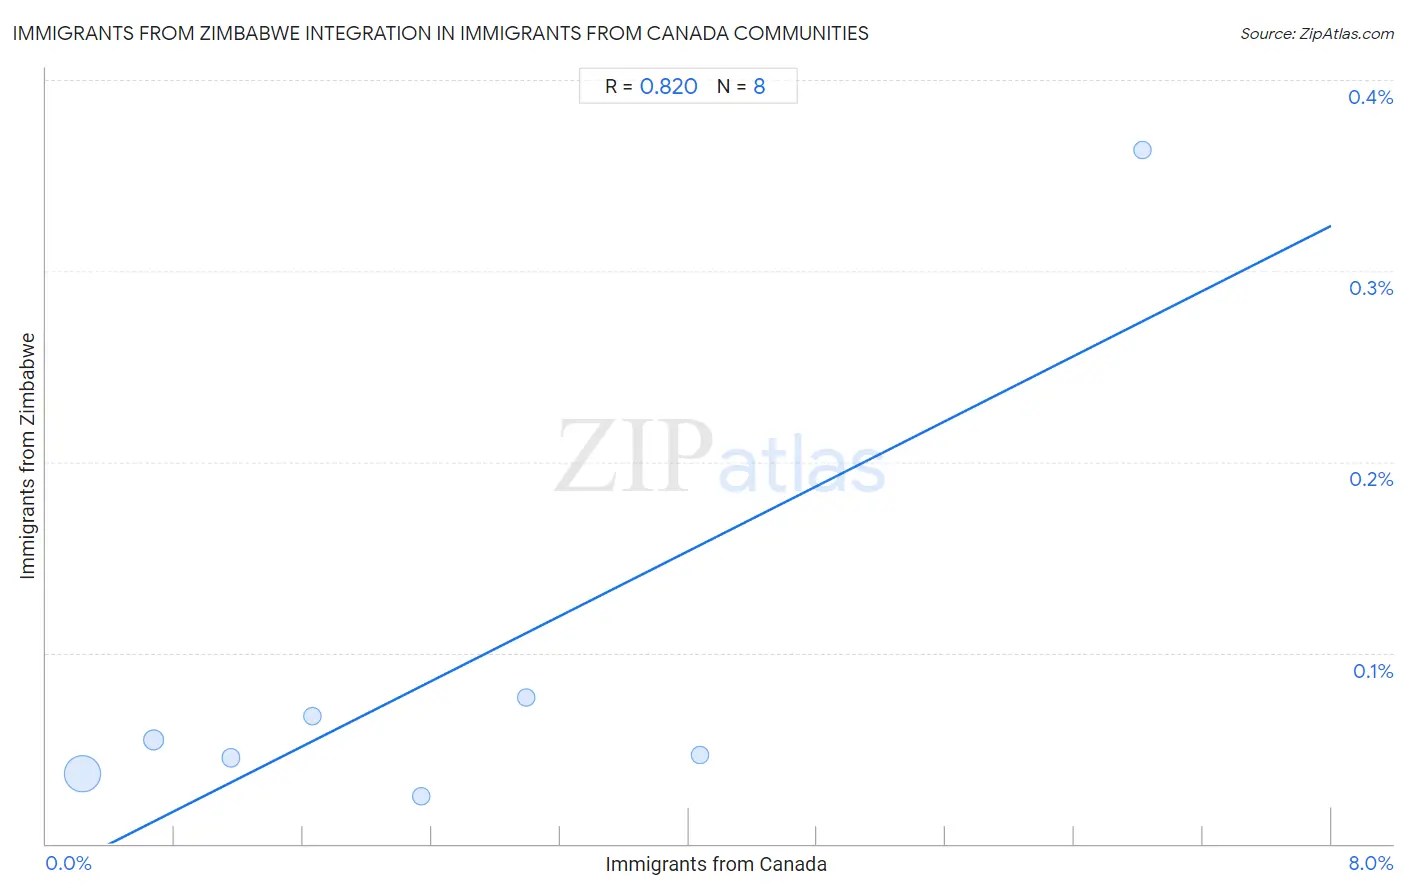 Immigrants from Canada Integration in Immigrants from Zimbabwe Communities